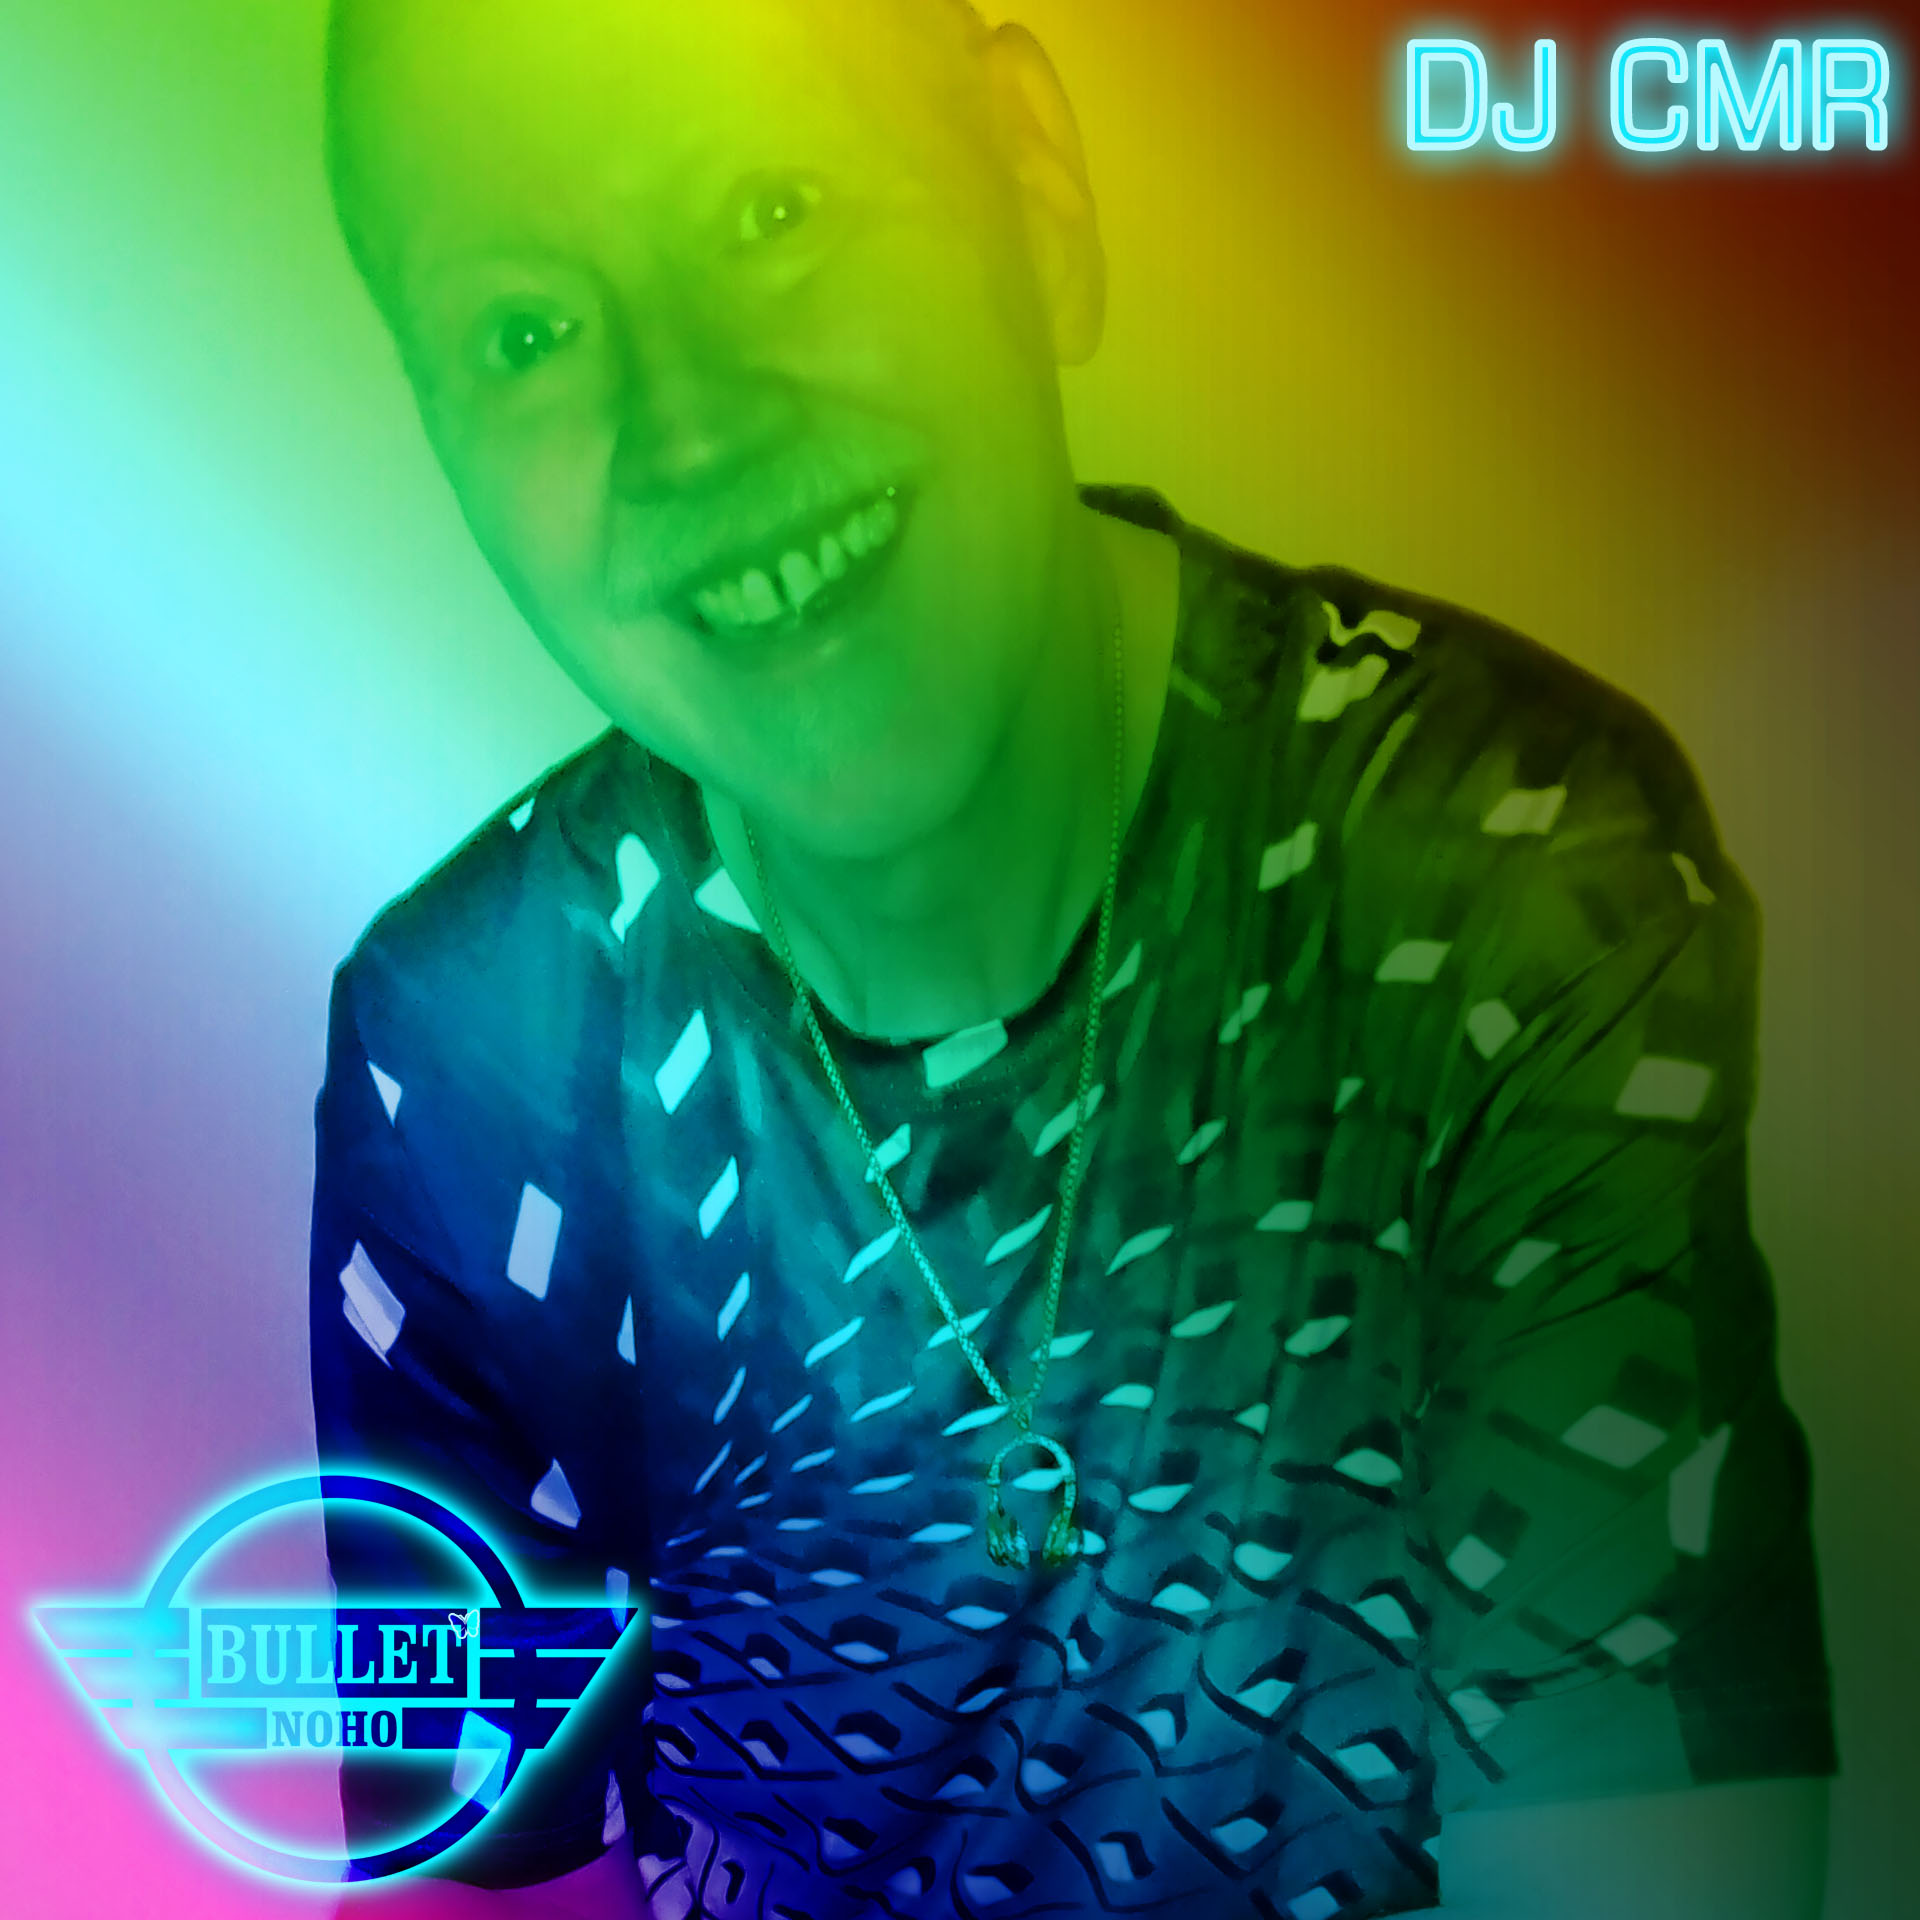 DJ CMR: Friday, 05/10/24 from 8:00 PM to 2:00 AM